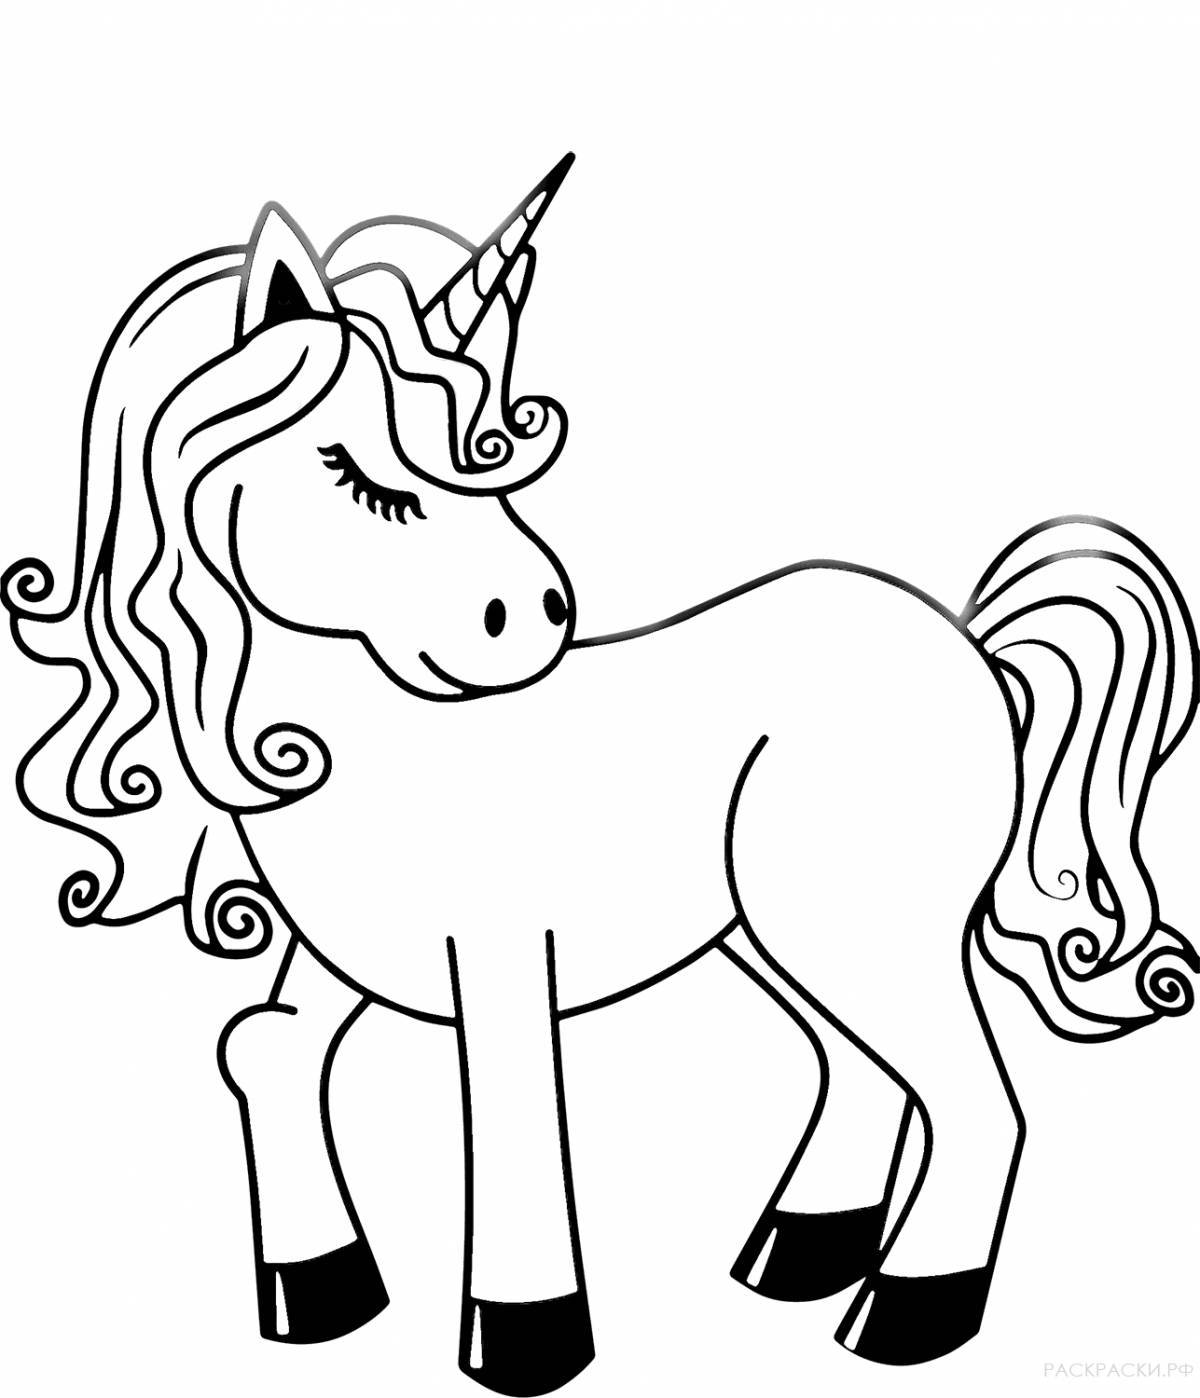 Lovely unicorn coloring book